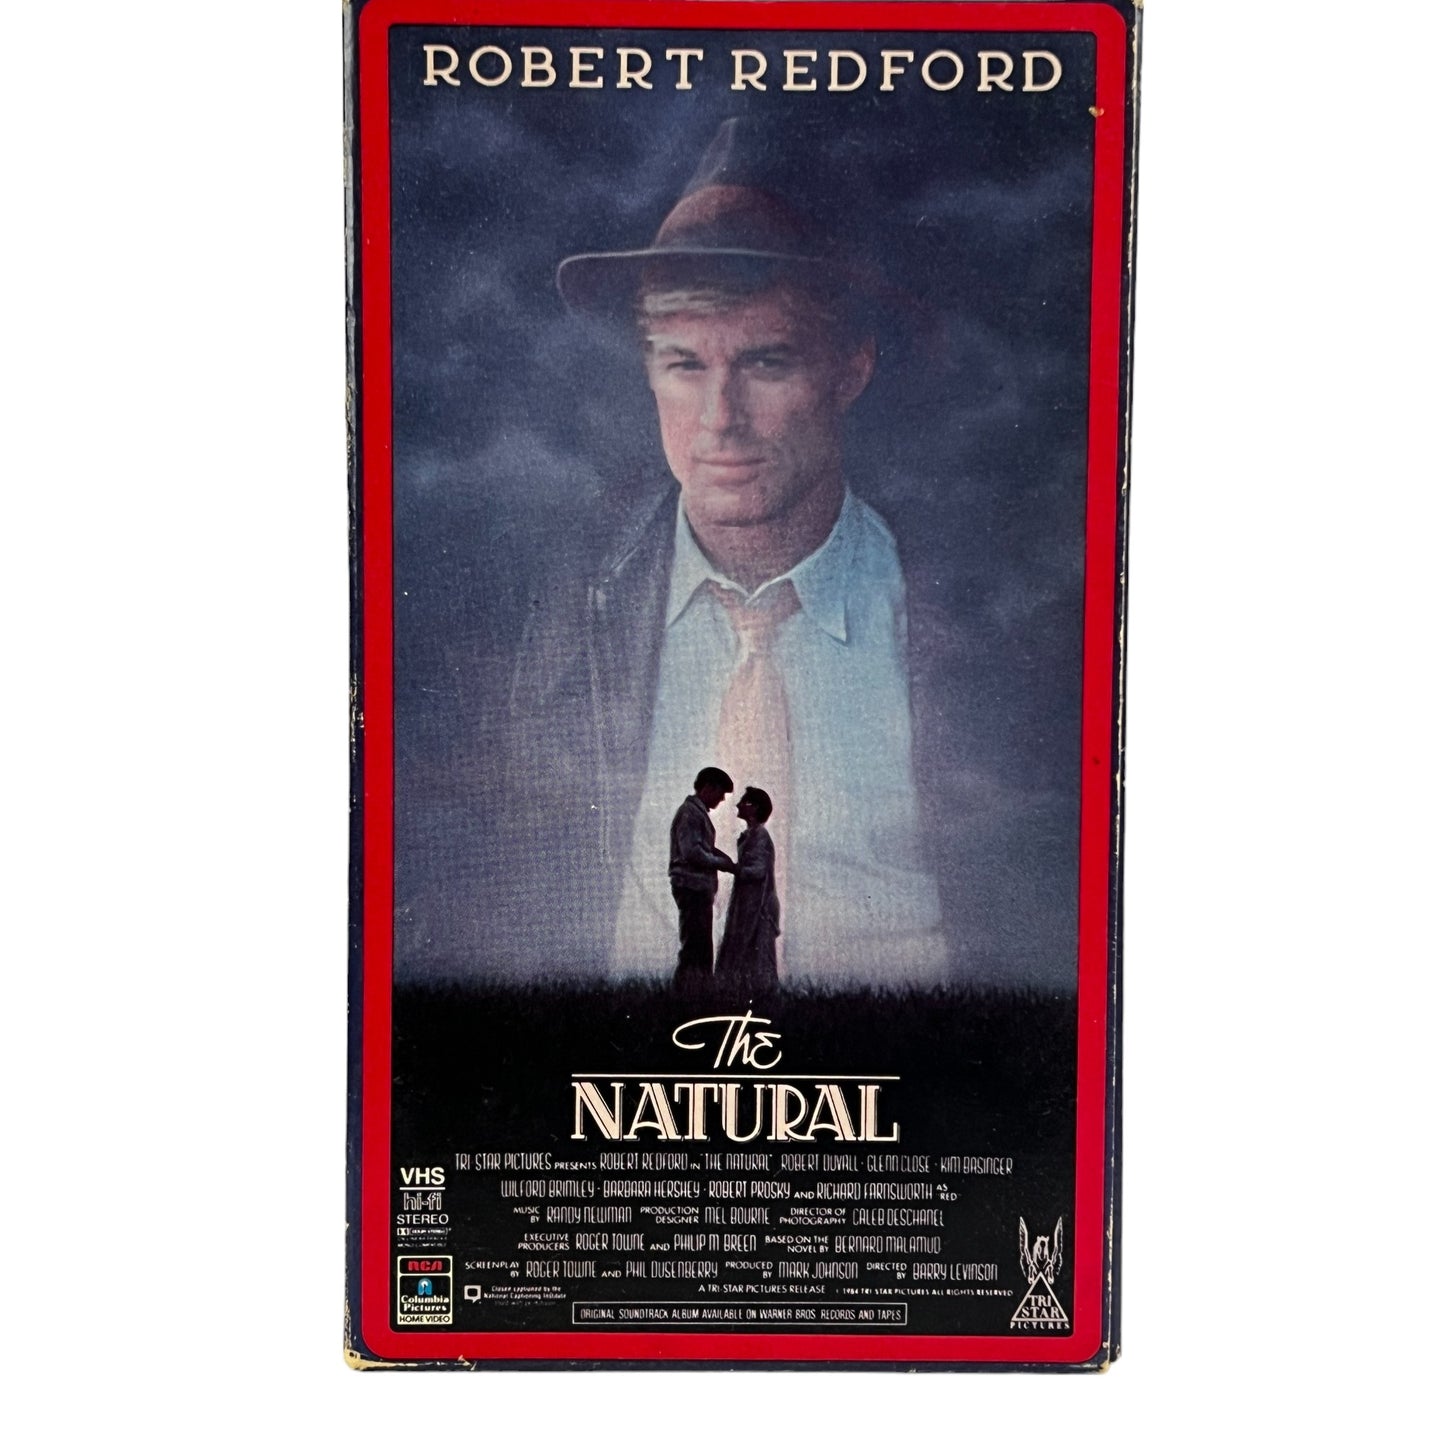 The Natural Robert Redford VHS